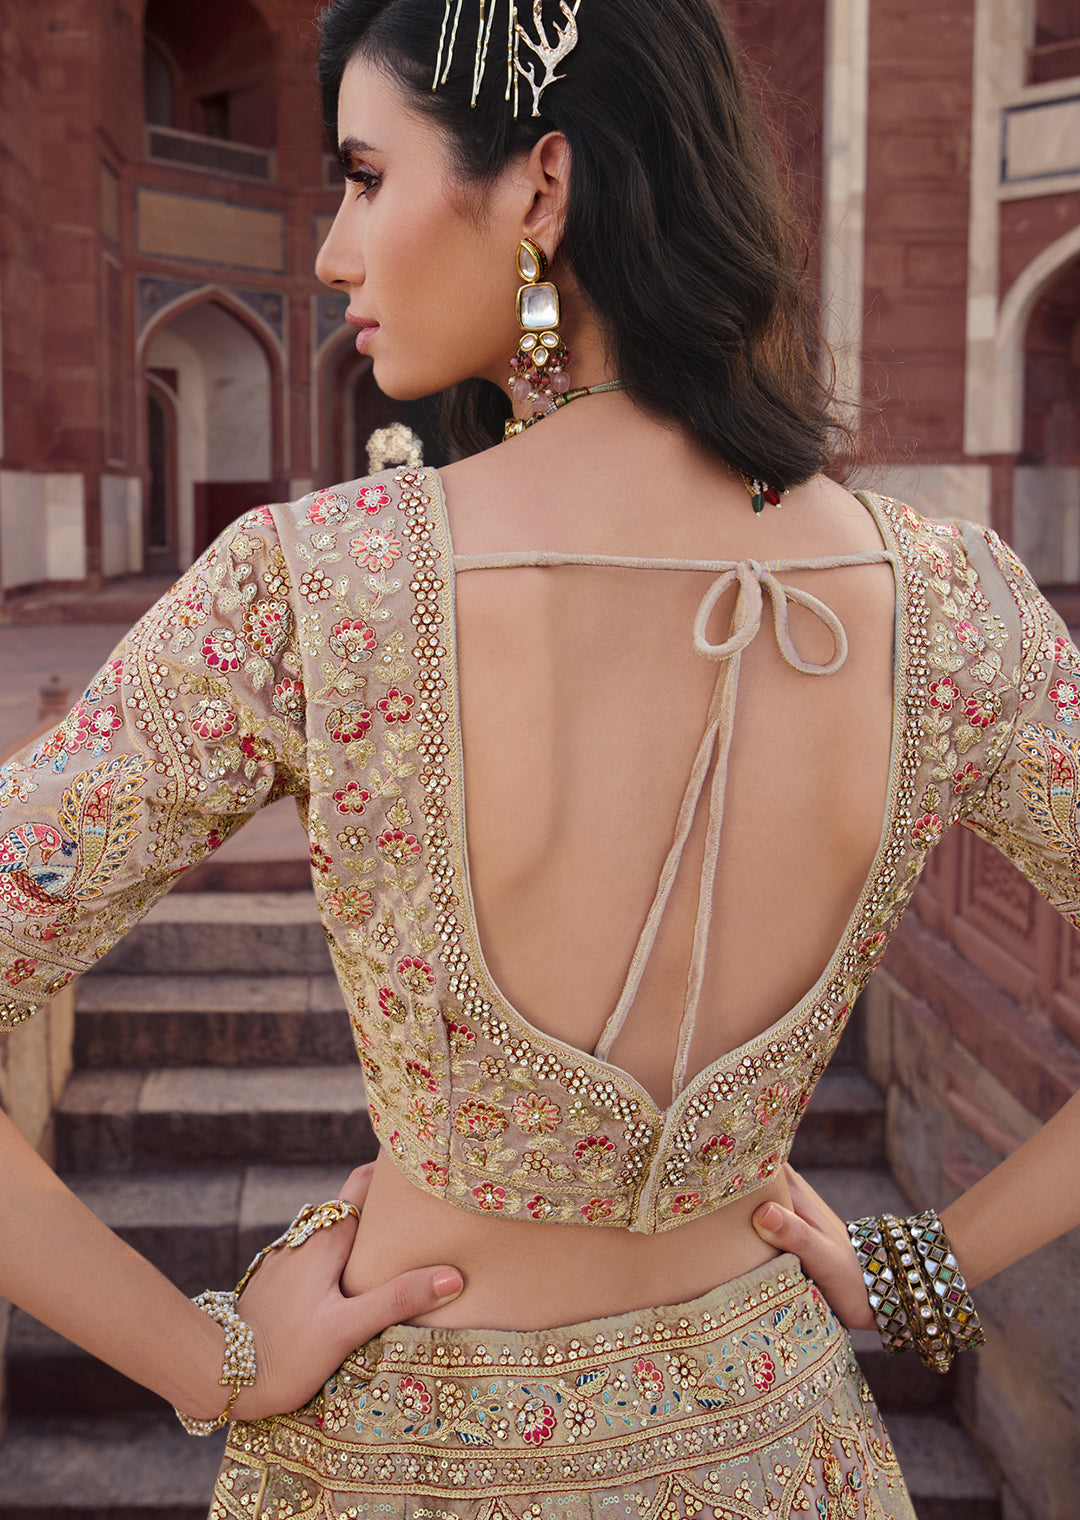 PARCHMENT OFFWHITE	HEAVY EMBROIDERED DESIGNER BRIDAL LEHENGA